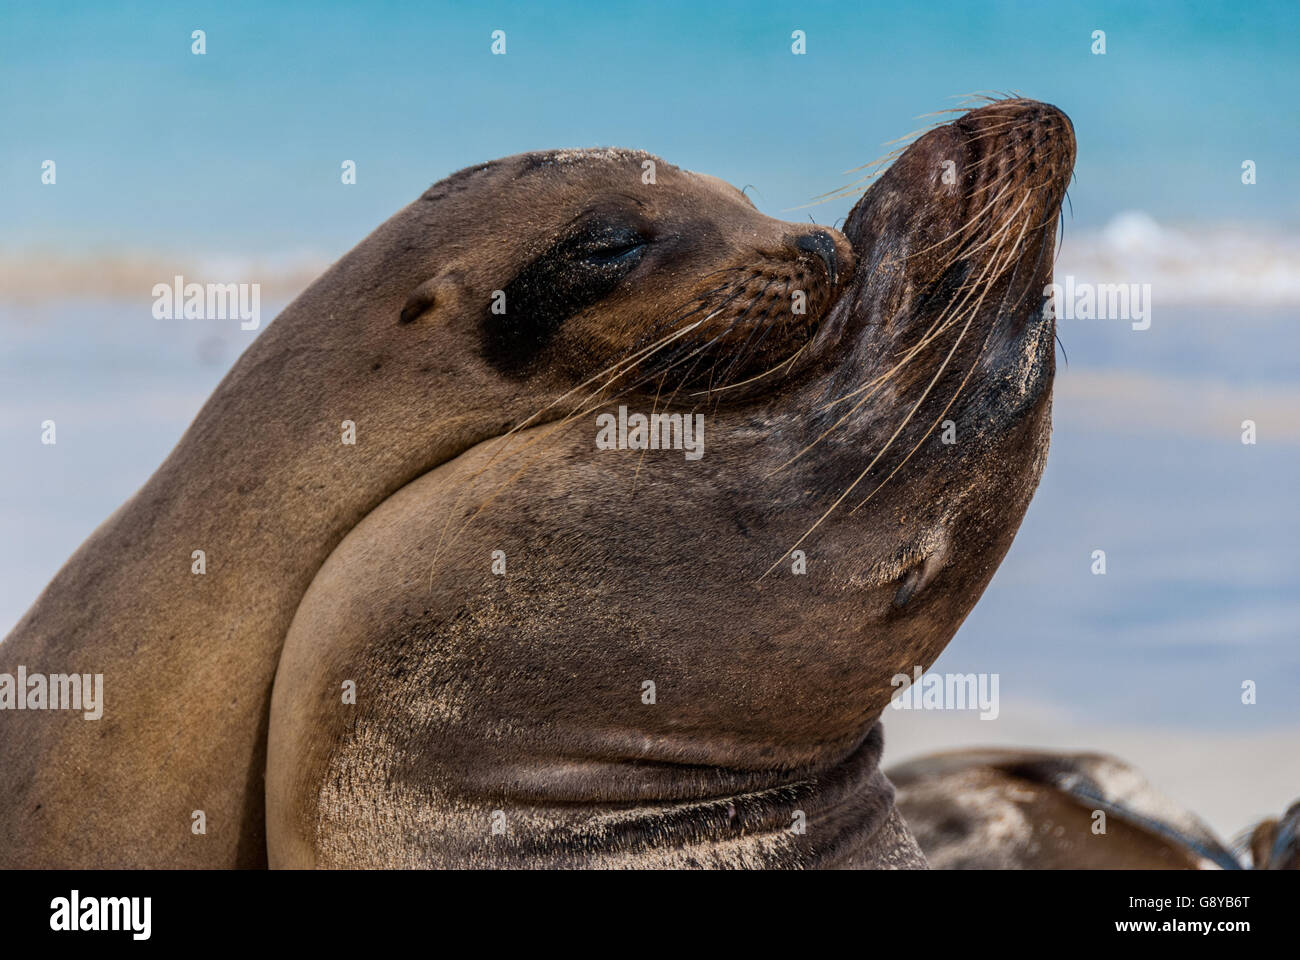 Relaxing on the beach, a pair of Galapagos Sea Lions share a tender yin/yang moment supporting each other on Sante Fe Island, Ga Stock Photo